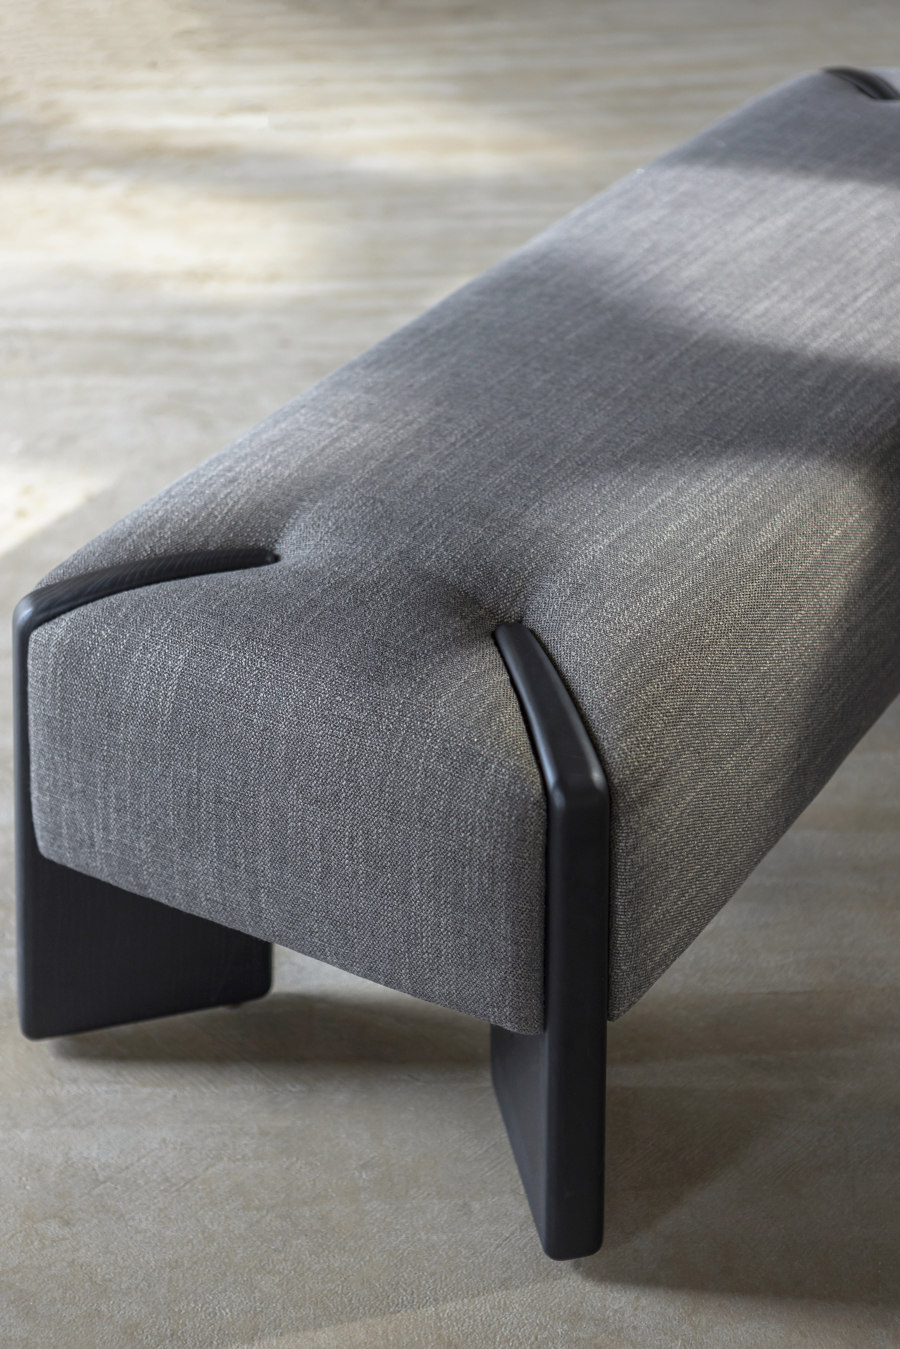 Seating as a social catalyst: Hew by Parla | Novedades